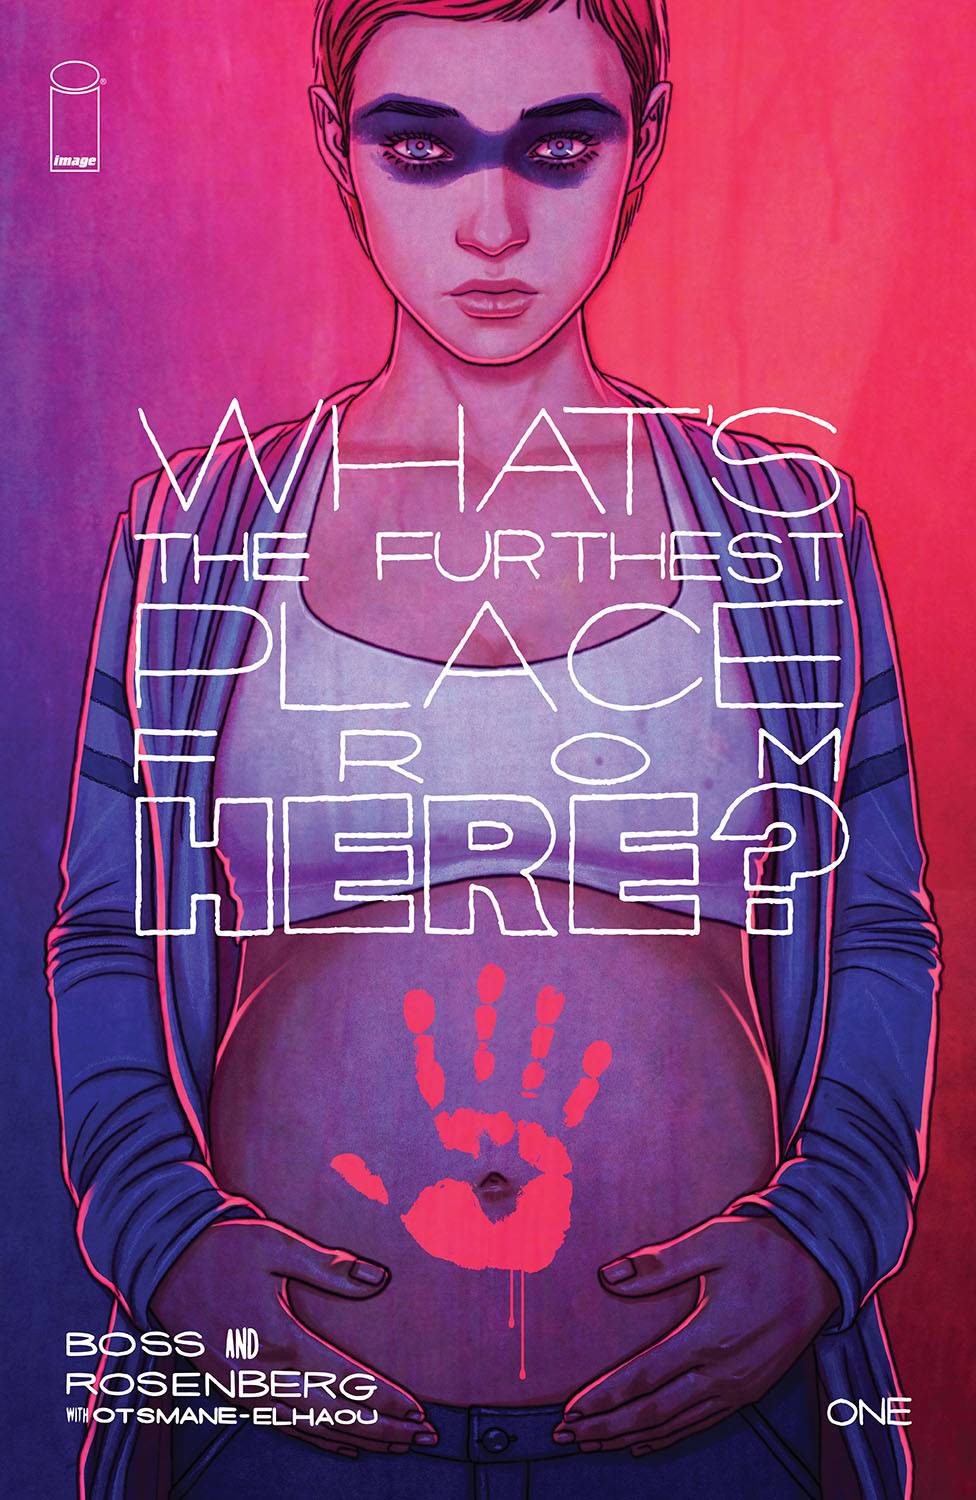 WHAT'S THE FURTHEST PLACE FROM HERE #1 1:75 JENNY FRISON VARIANT